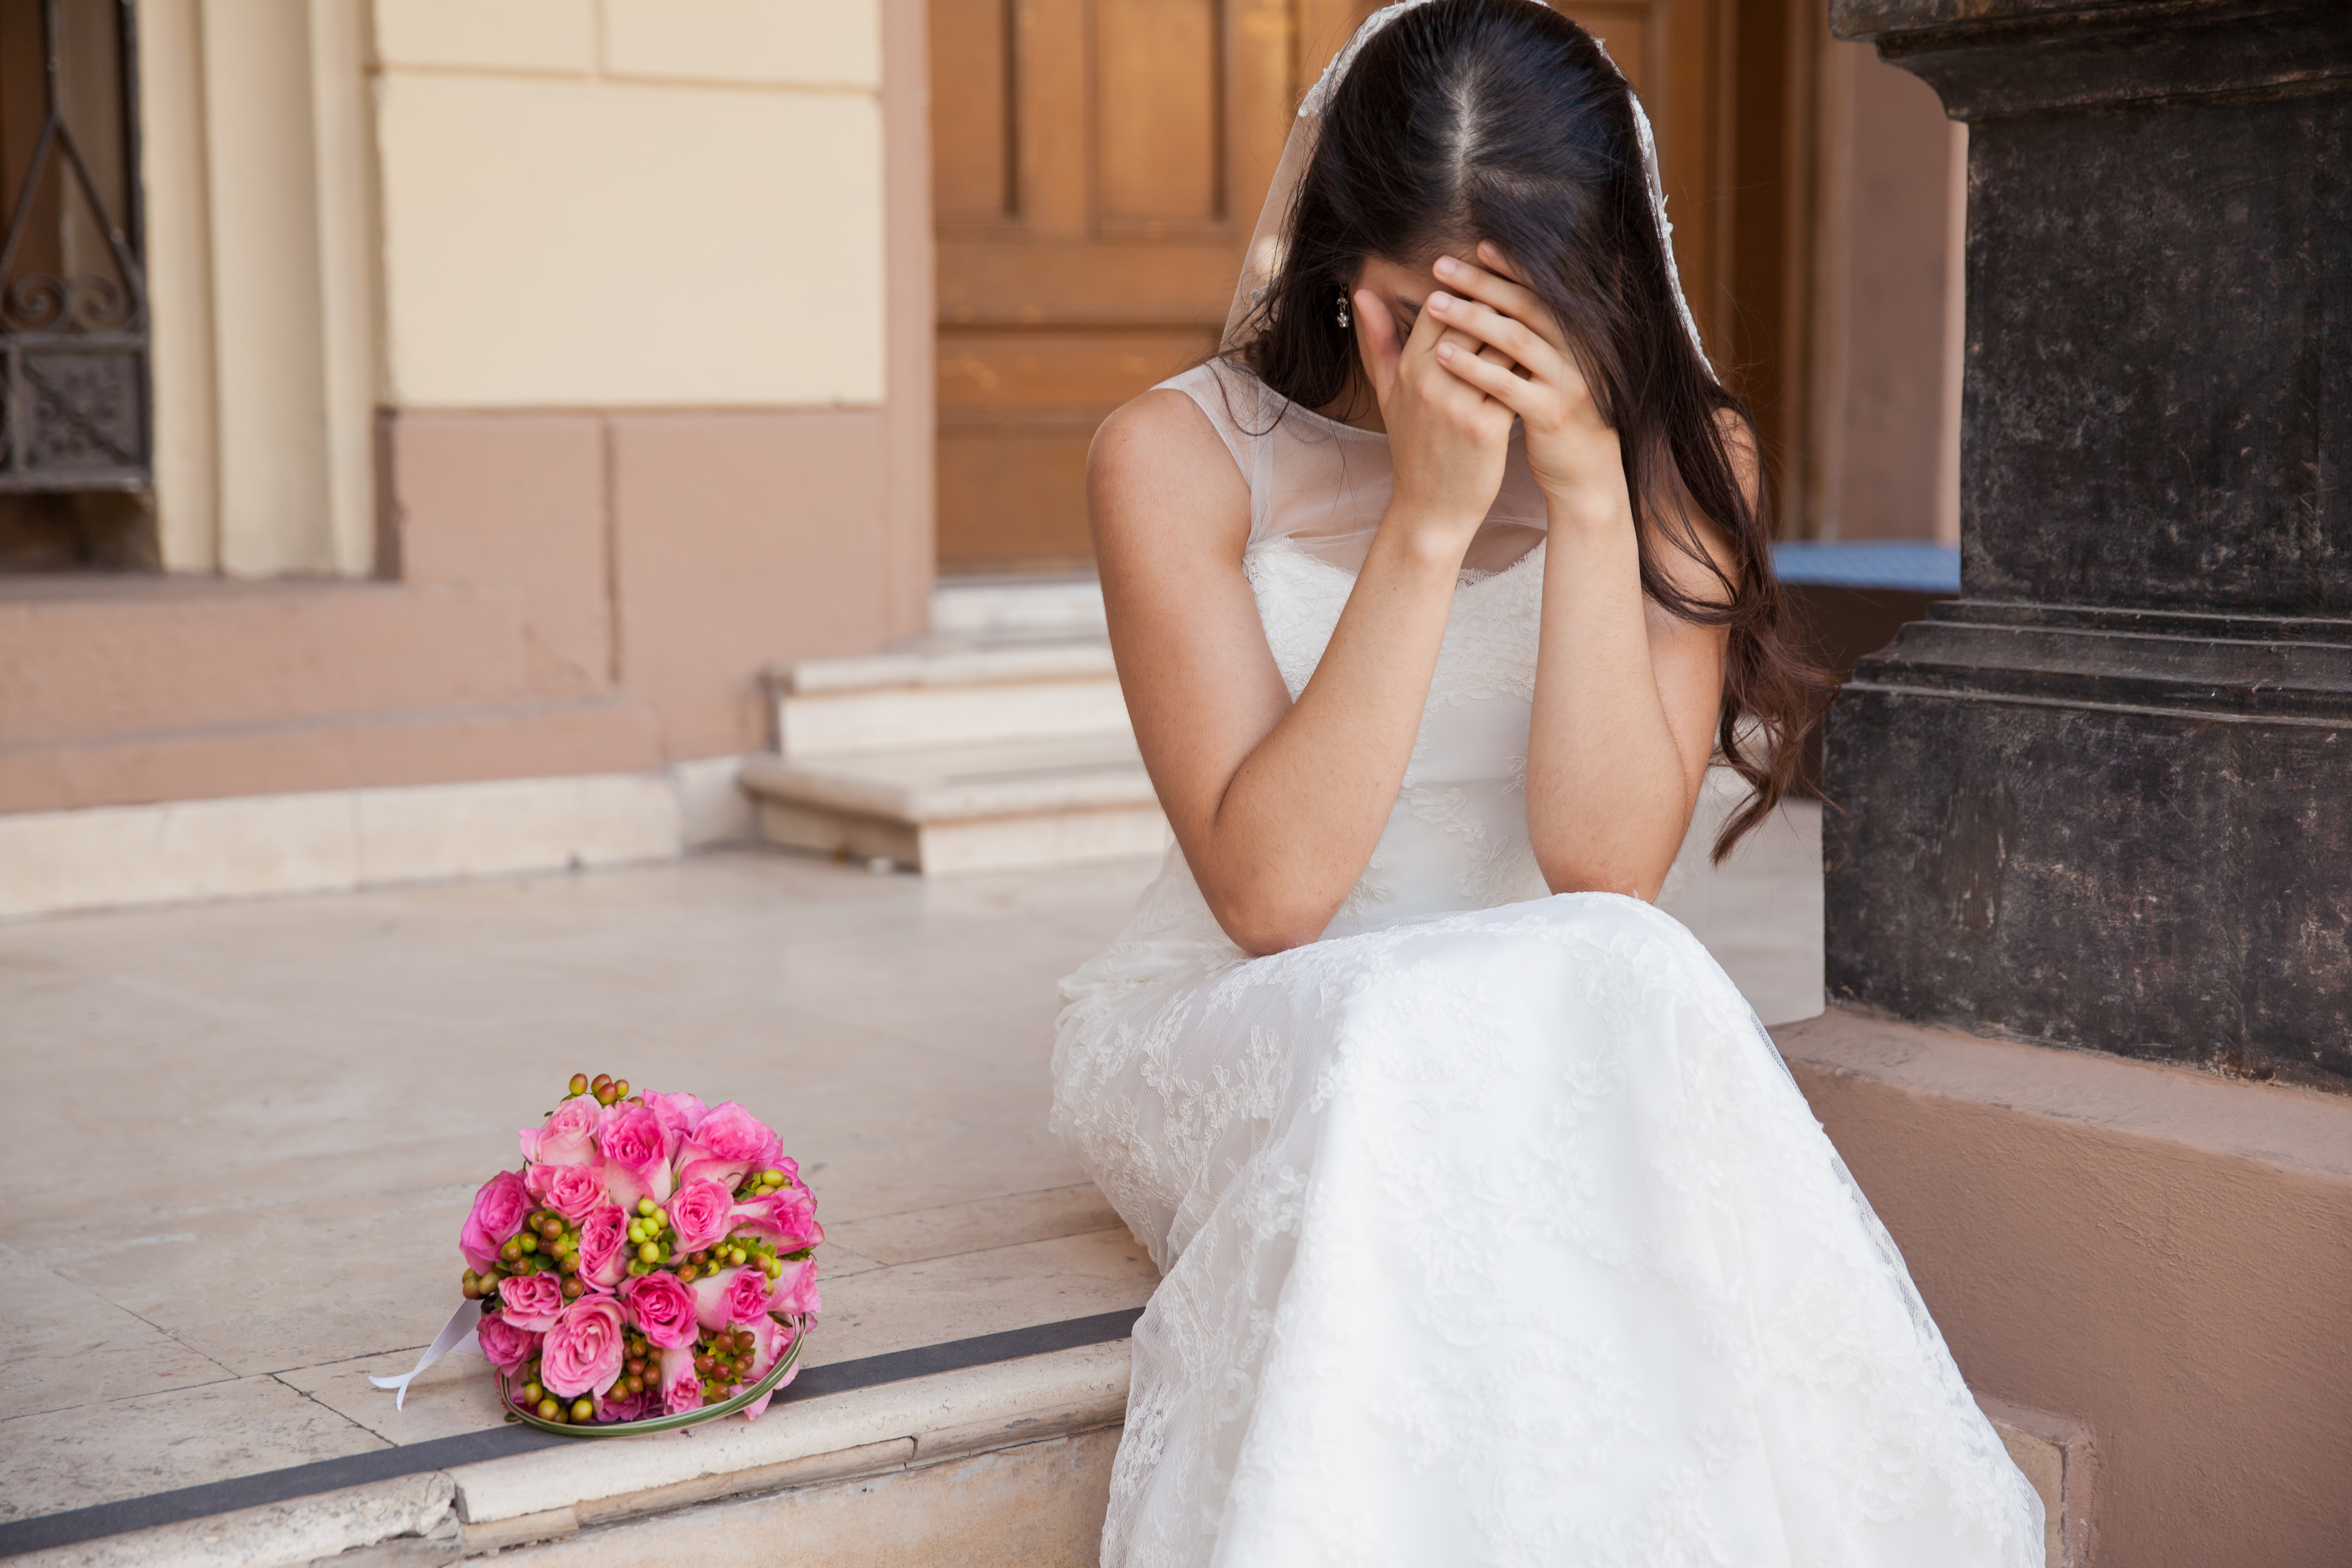 A crying bride | Source: Shutterstock